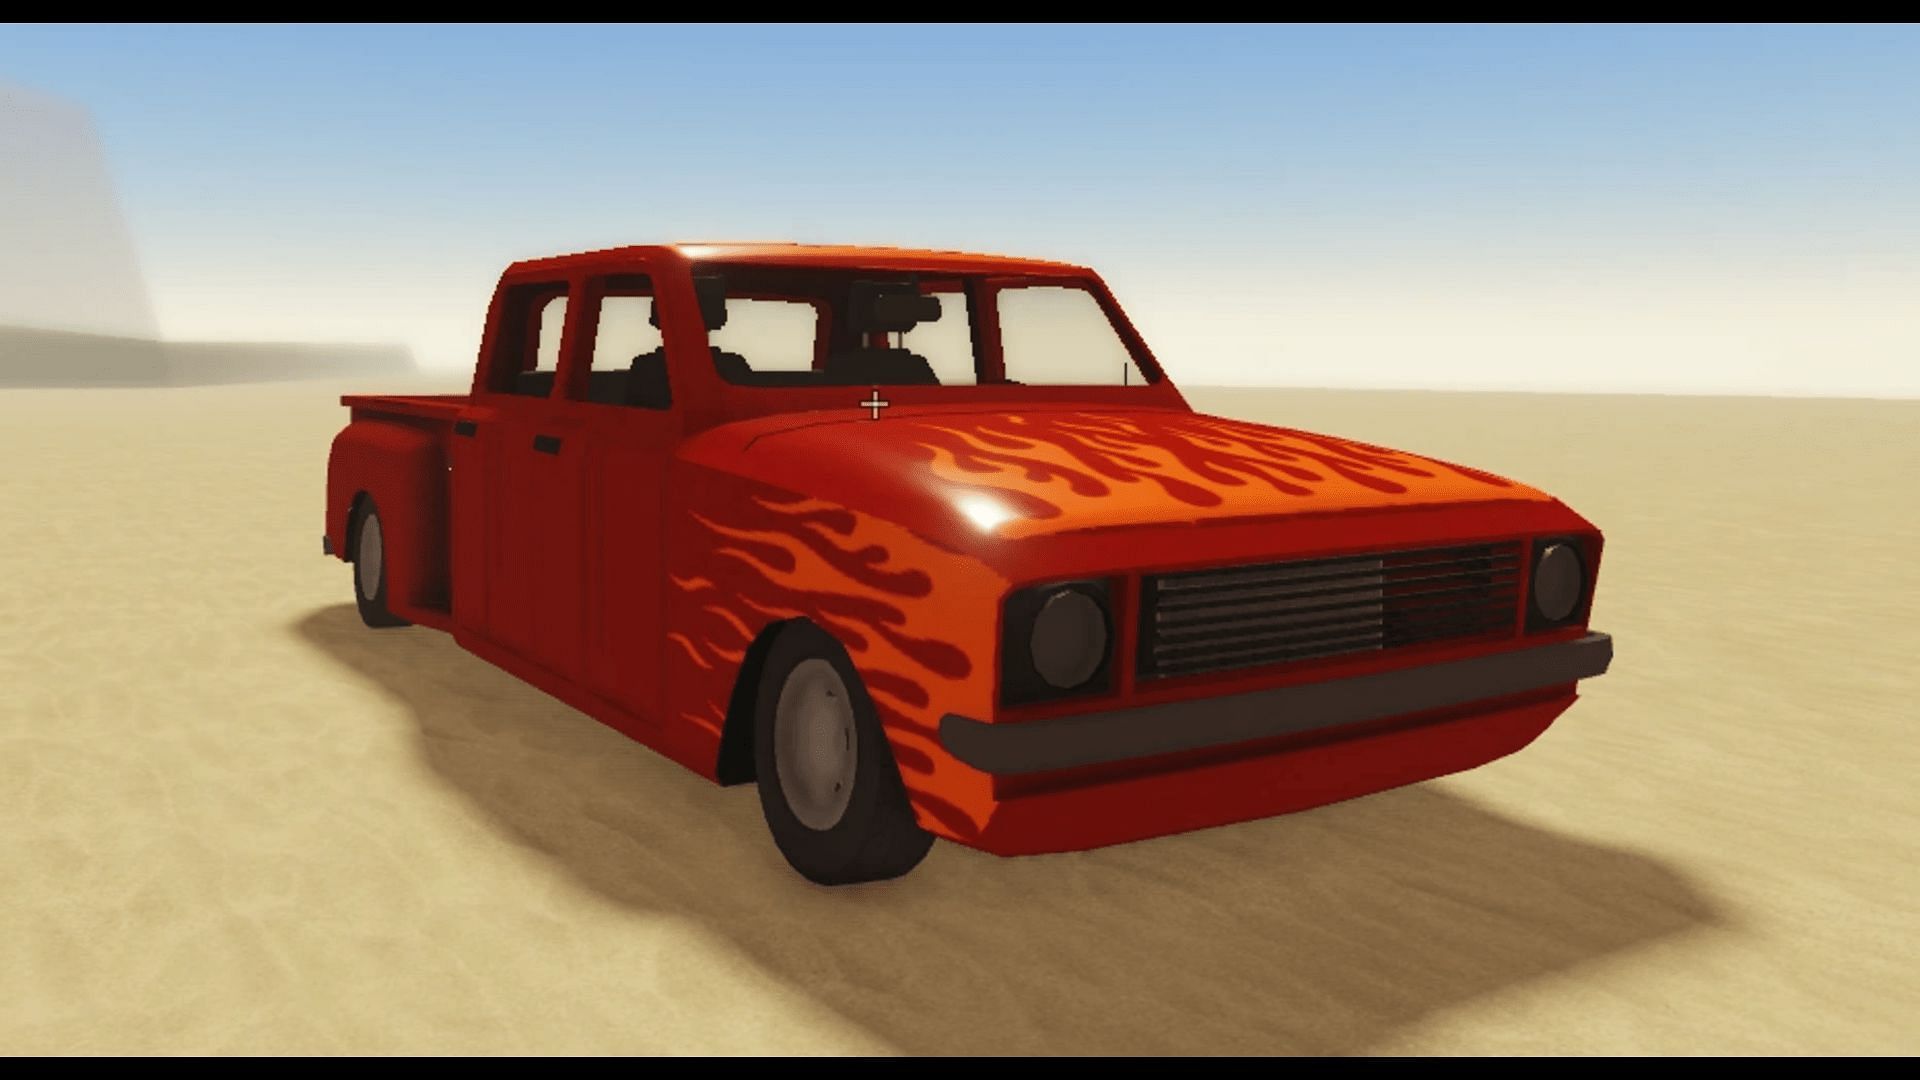 Blaze through the deserts in the Flame Truck in A Dusty Trip (Image via Roblox)